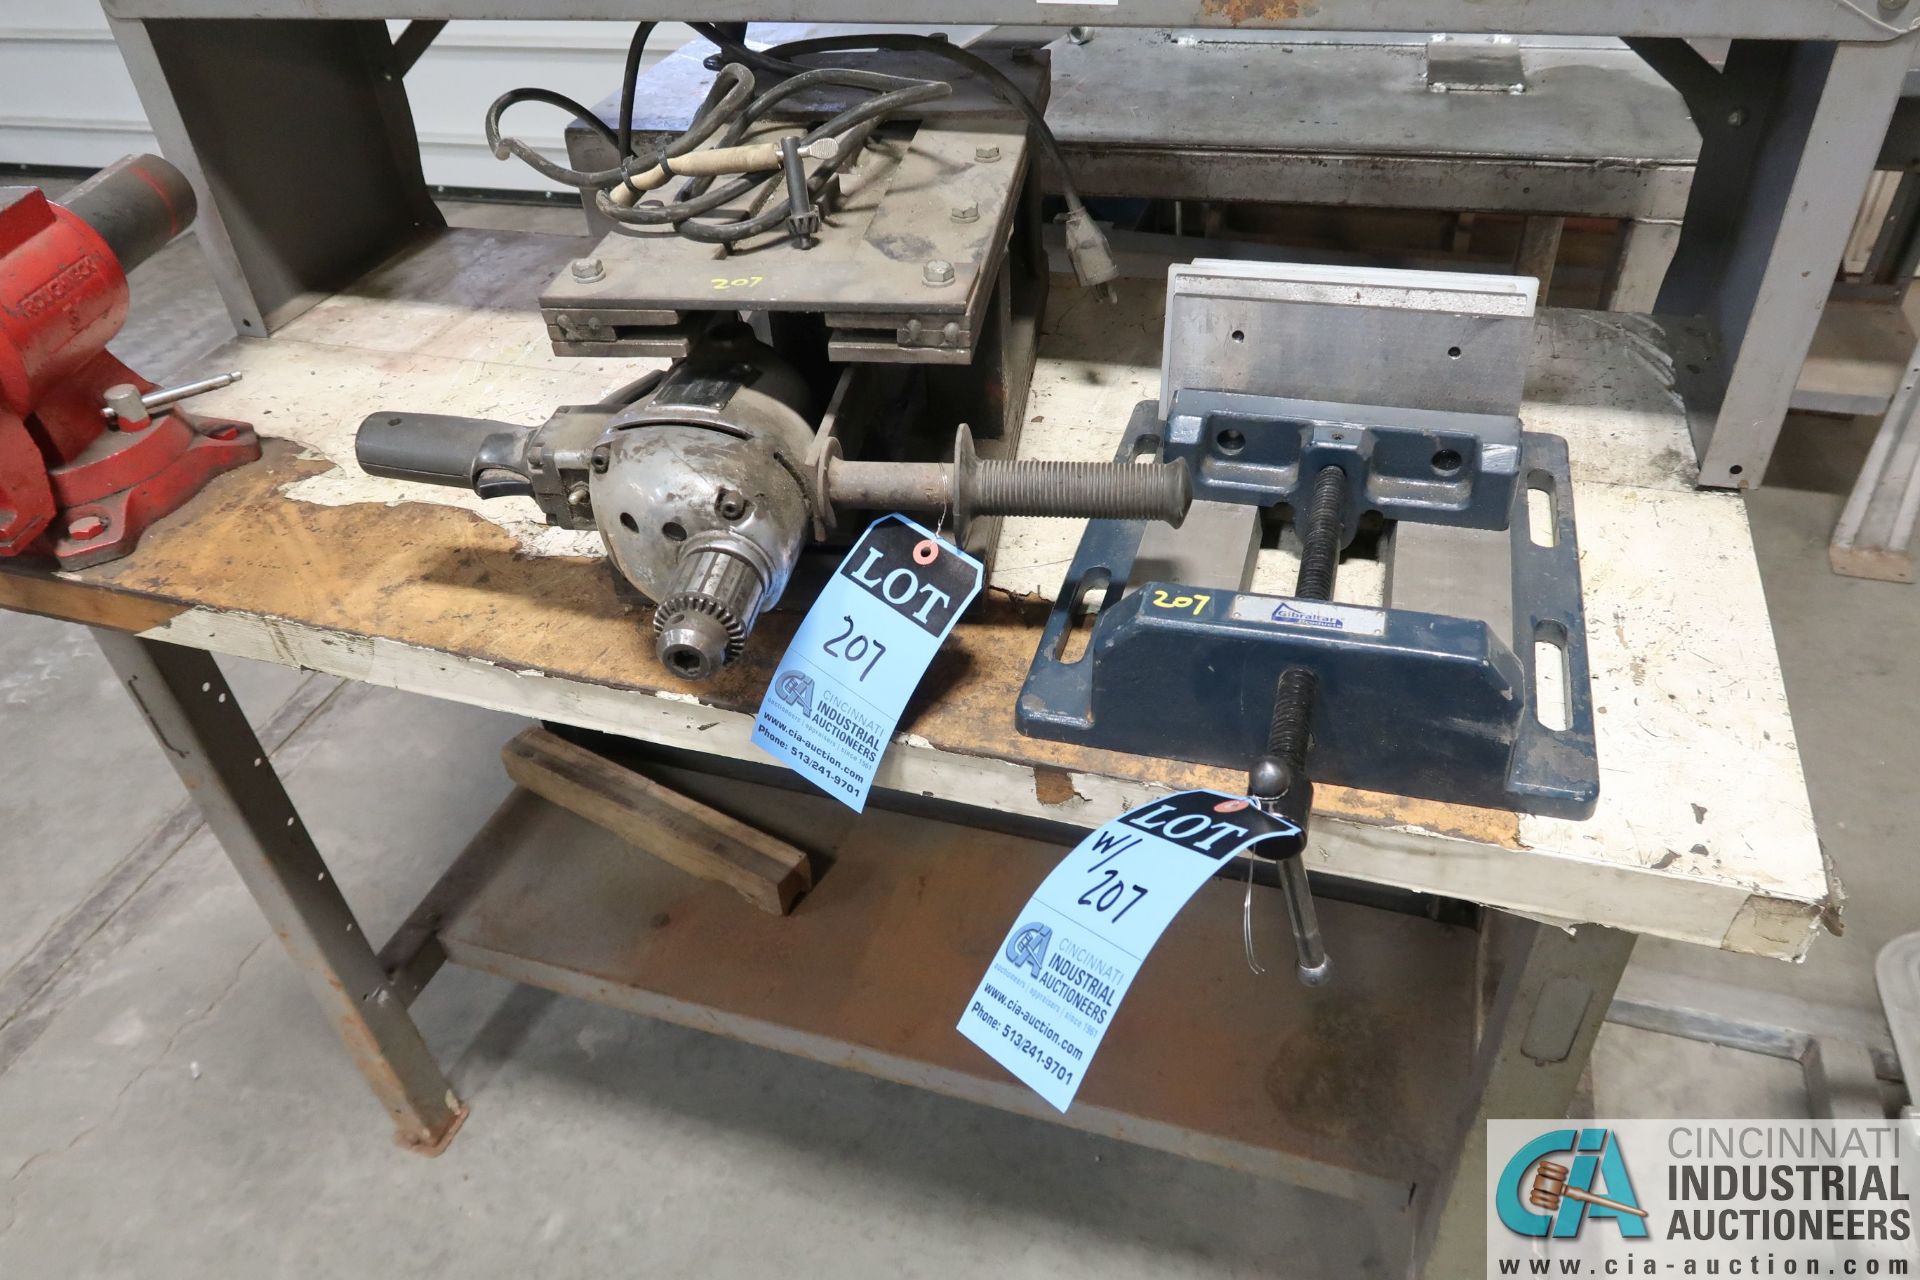 (LOT) 1/2" SPECIALITY DRILL AND 8" GIBRATOR DRILL VISE